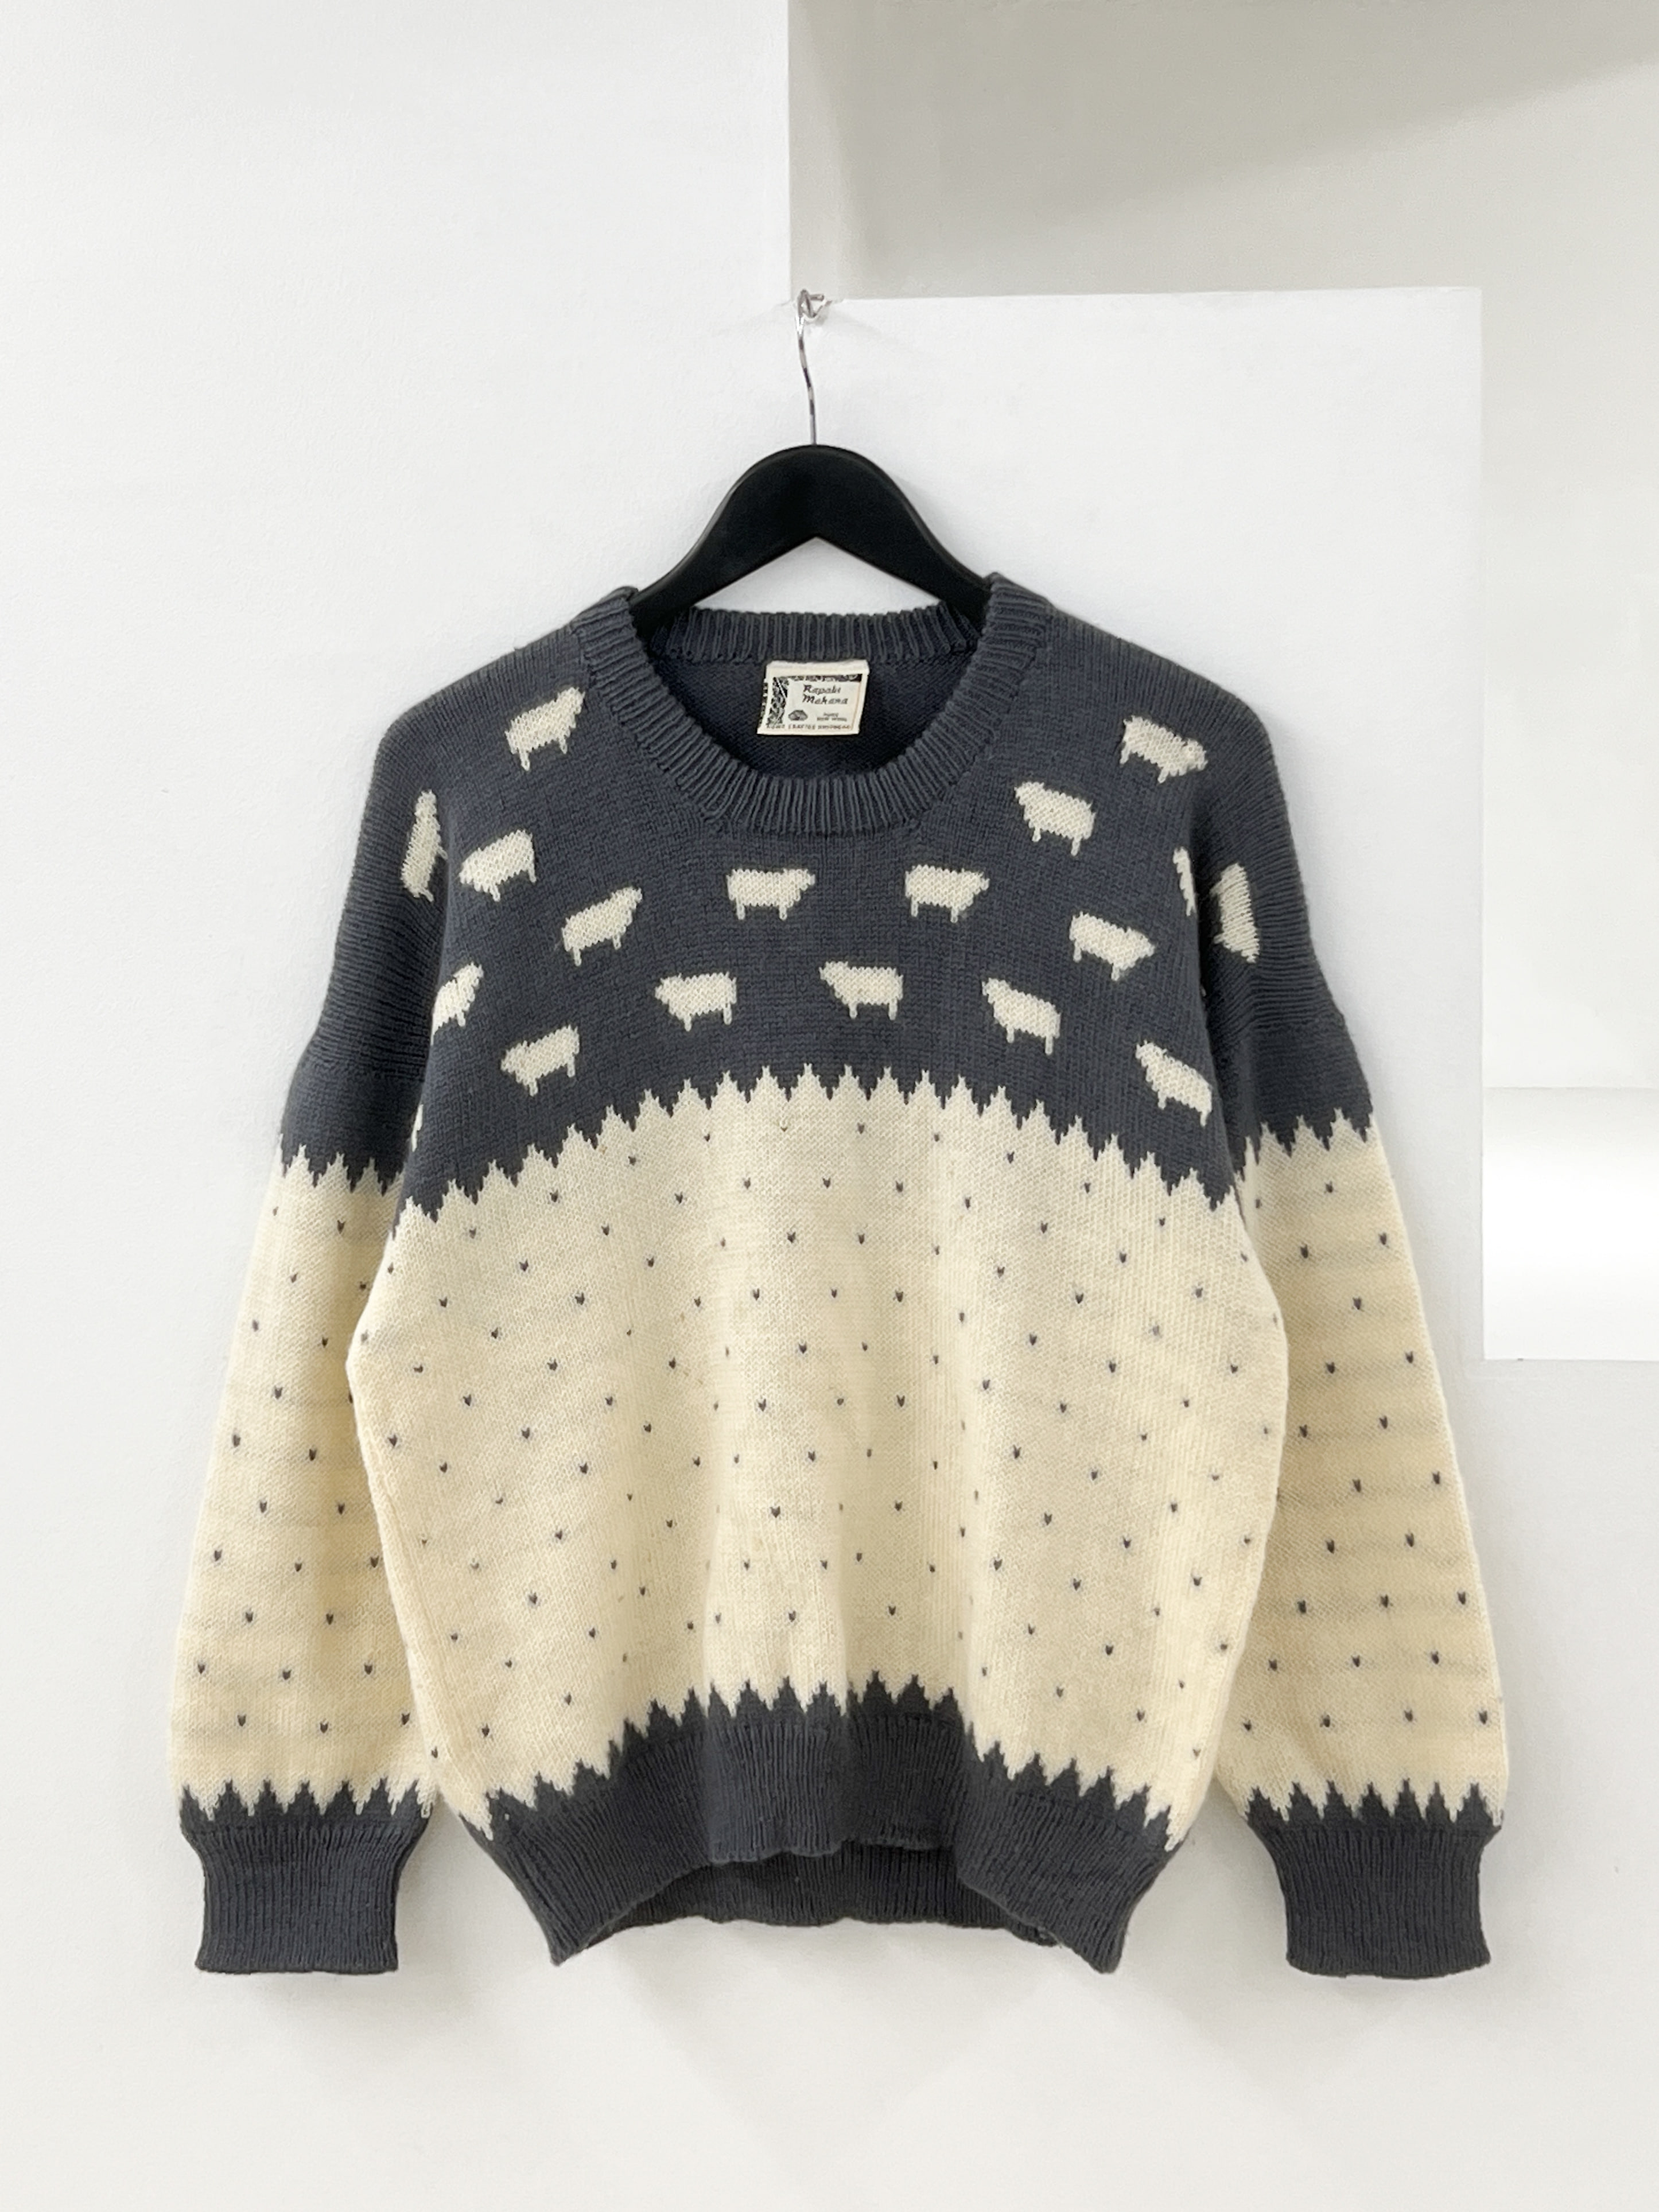 Nordic sweater, made in New Zealand